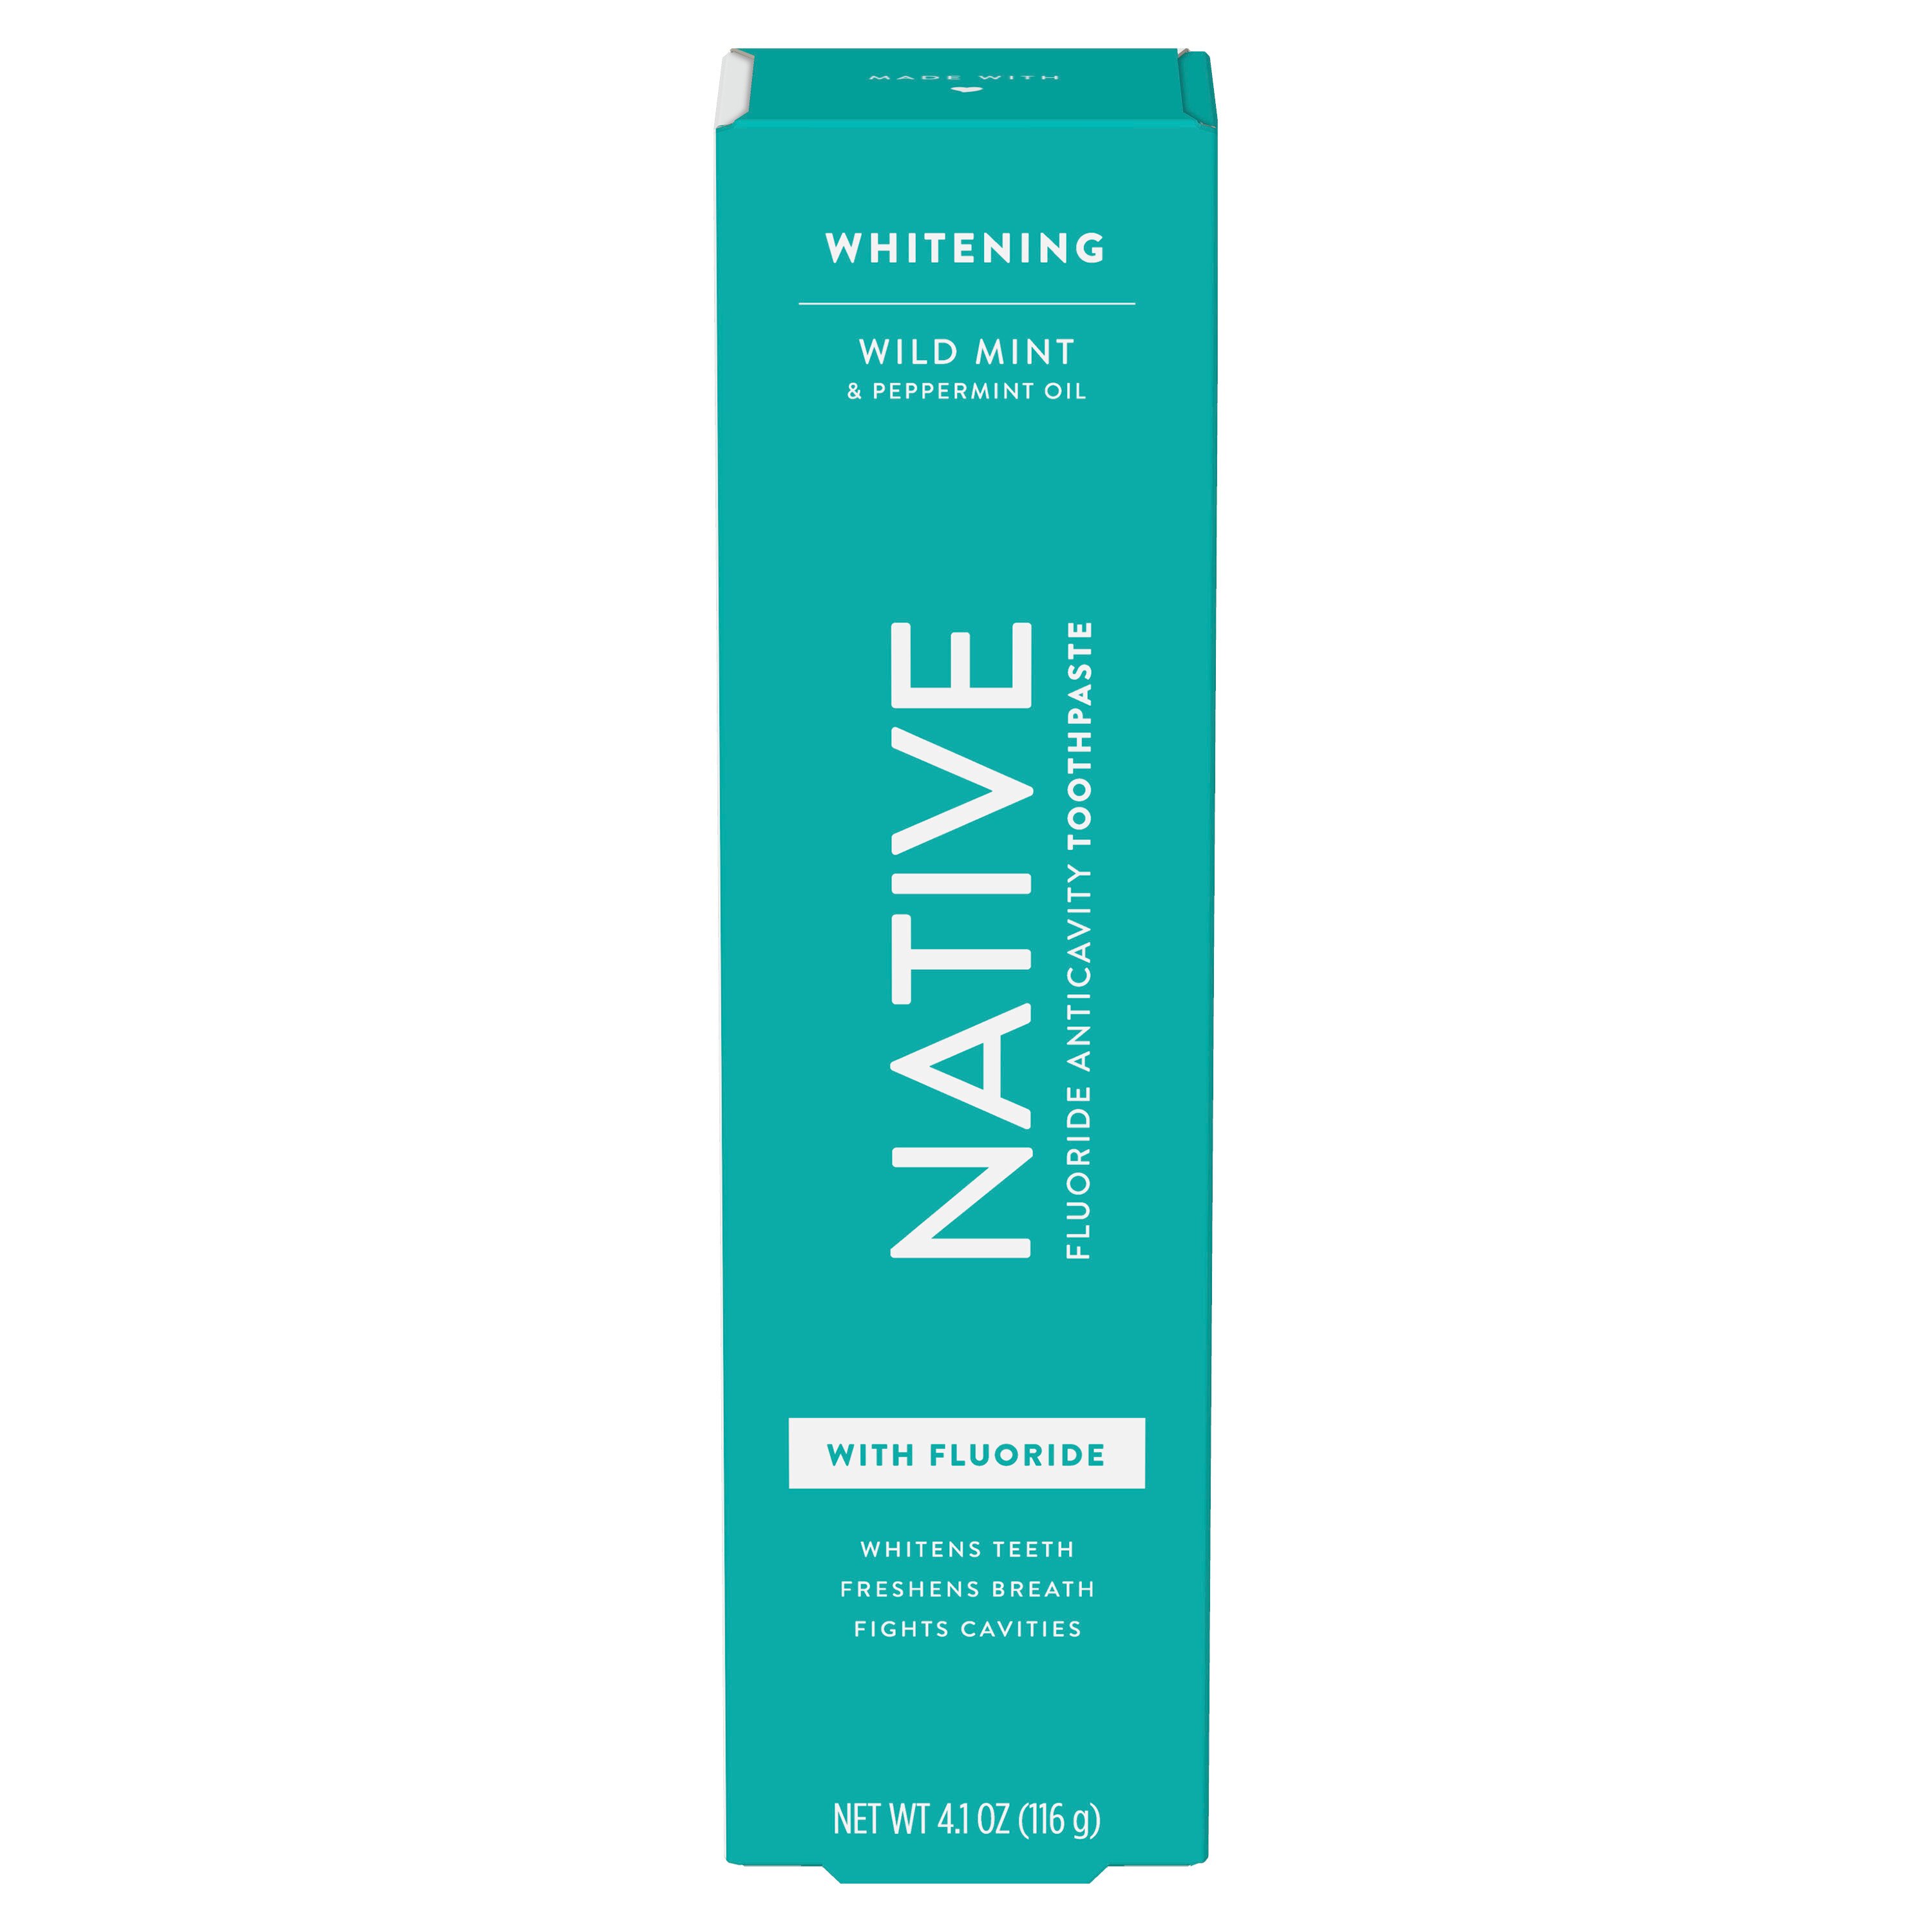 Native Fluoride Anticavity Whitening Toothpaste, Wild Mint And Peppermint Oil, 4.1 Oz , CVS